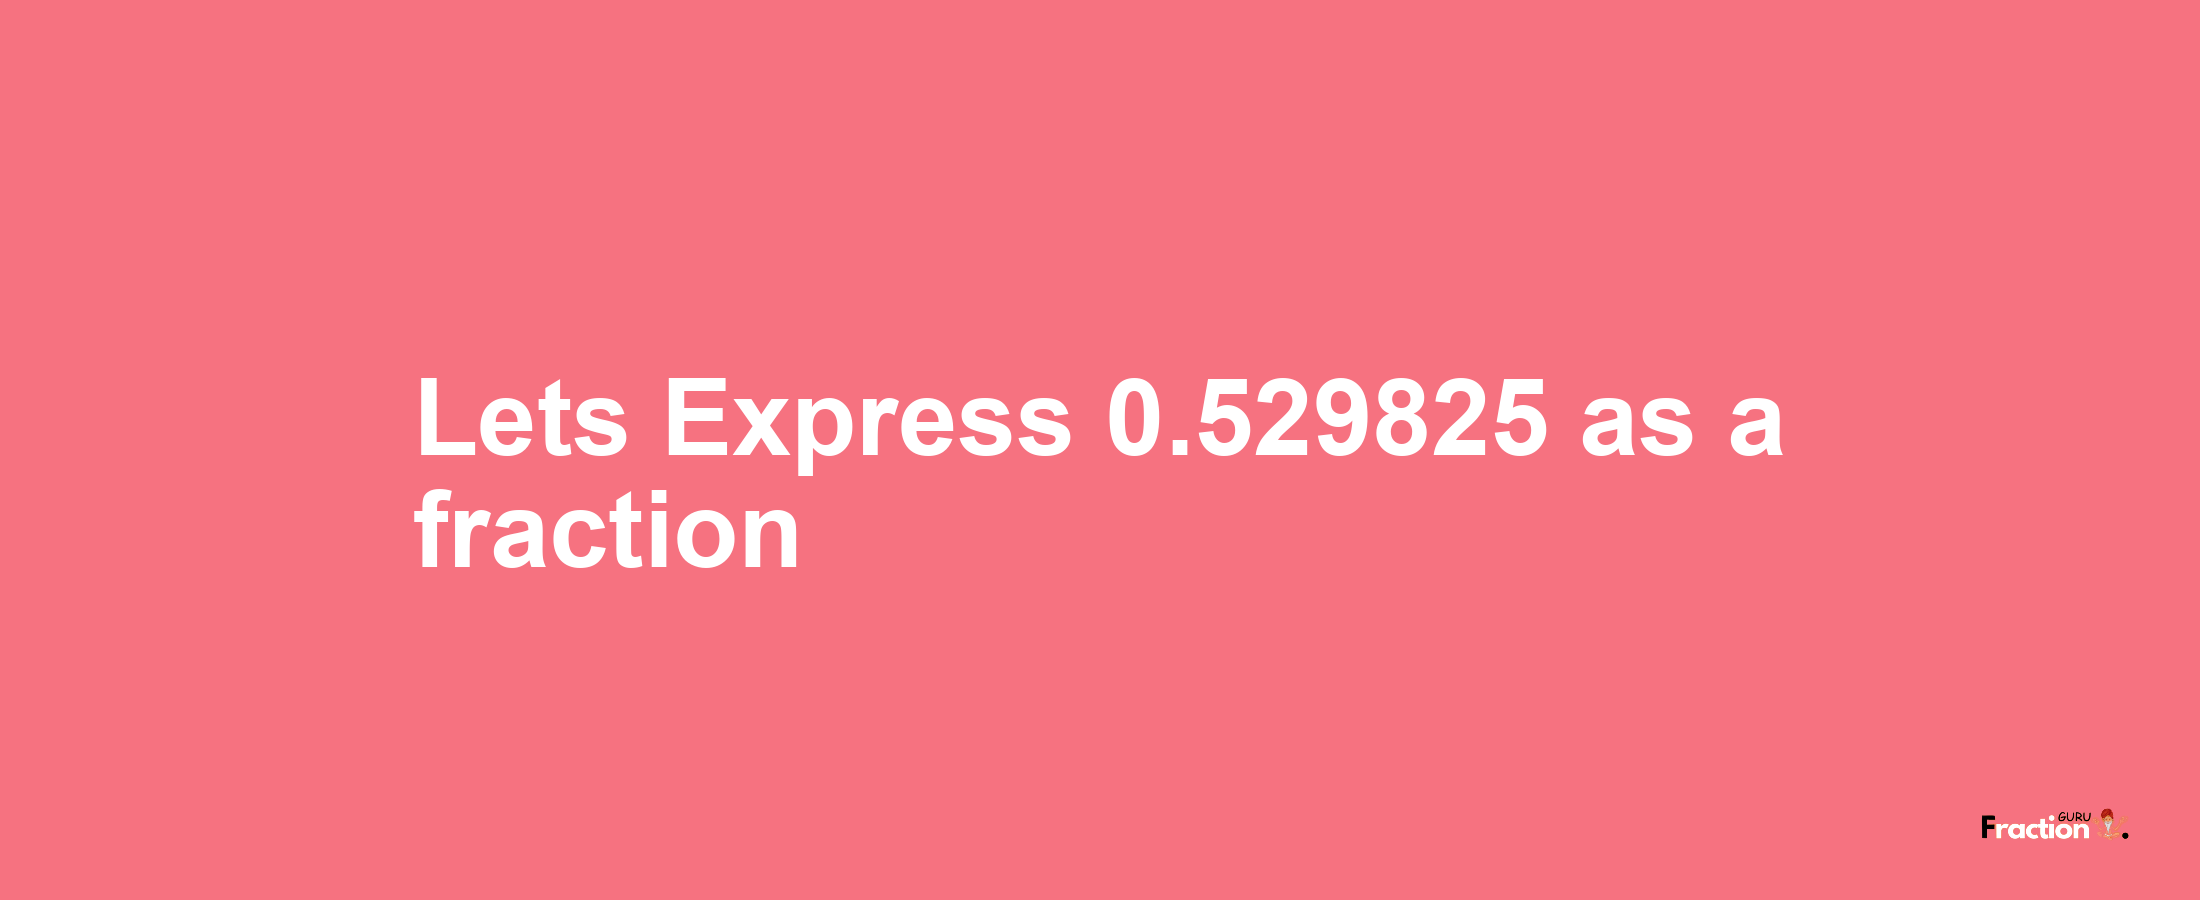 Lets Express 0.529825 as afraction